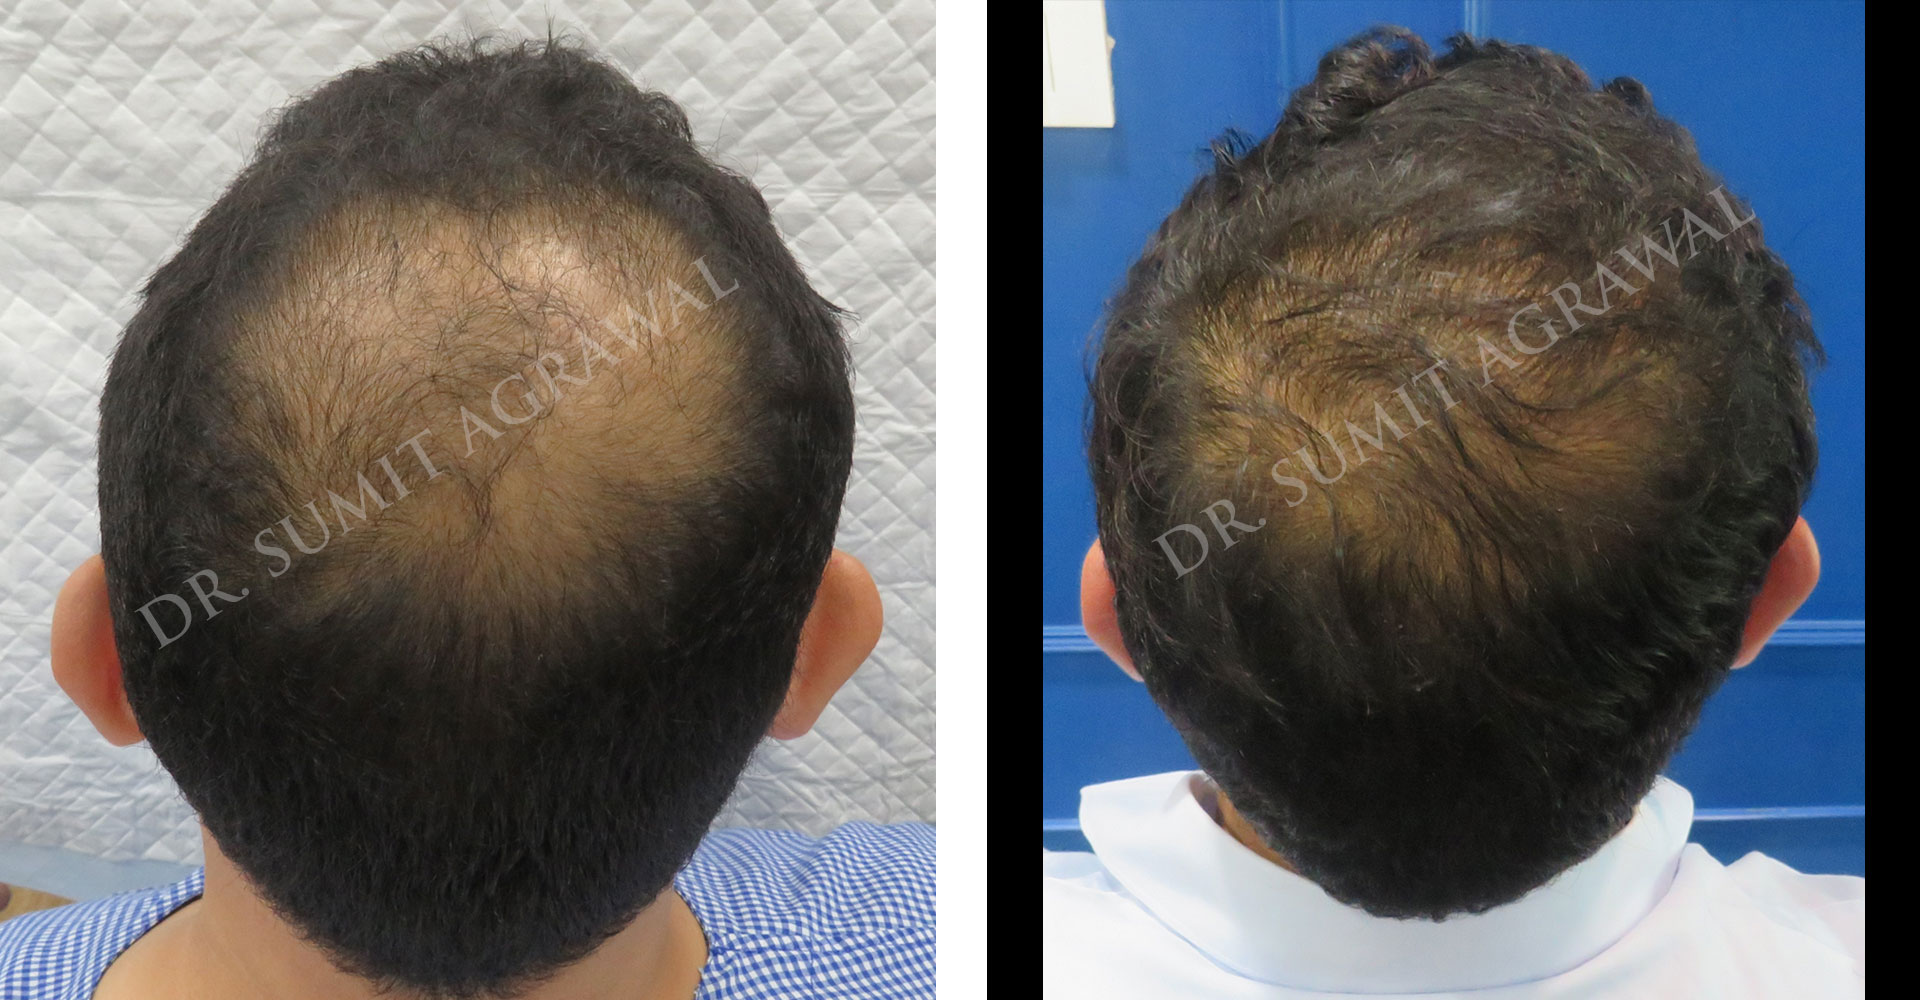 View Vertex (crown) Hair Transplant Before and After photos of successful results by Dr. Urvashi Chandra.